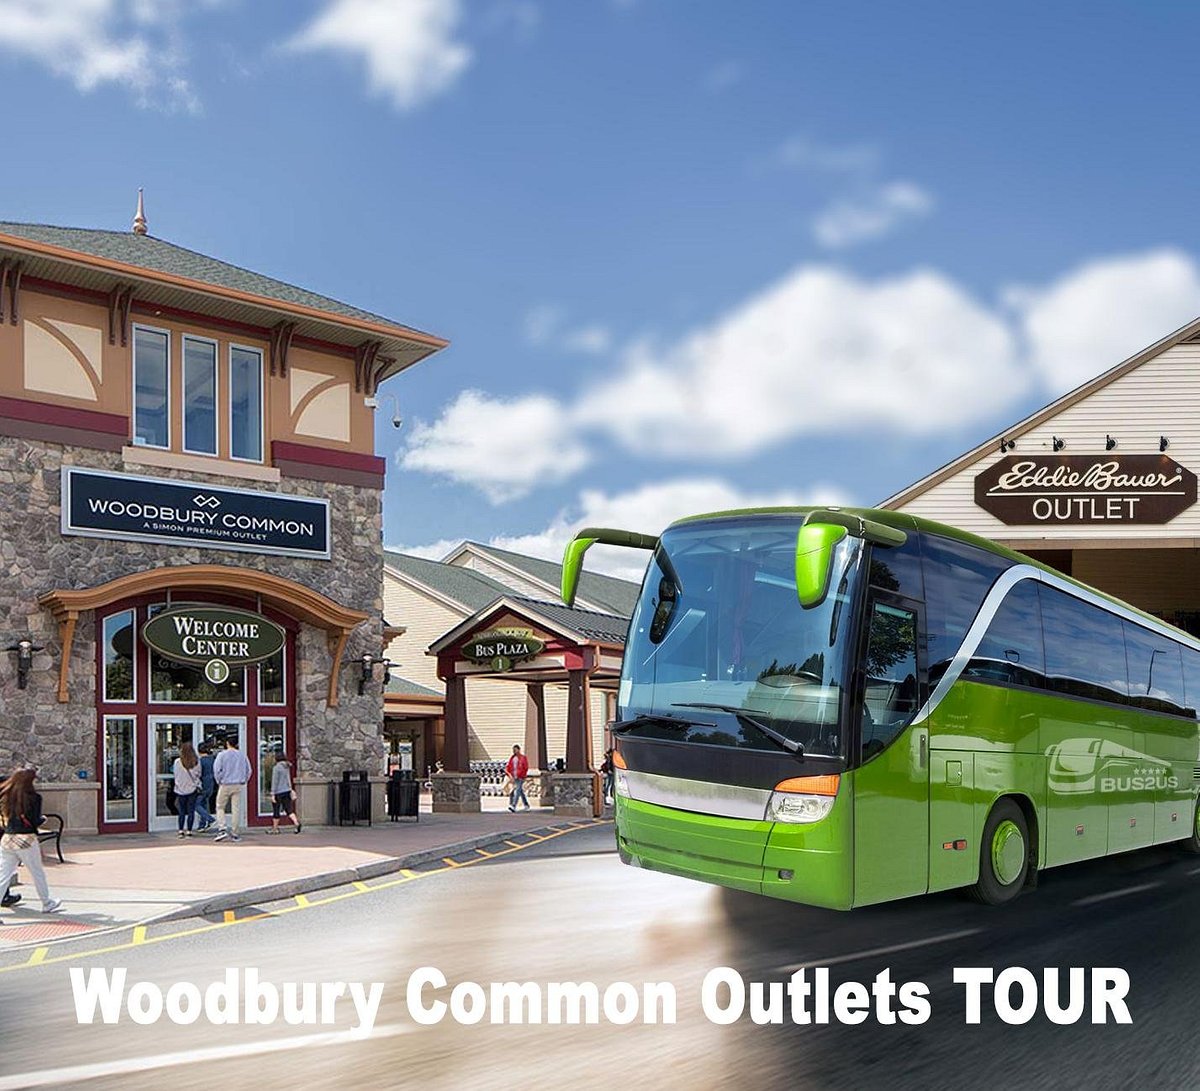 Woodbury Common Premium Outlets adds 7 shops